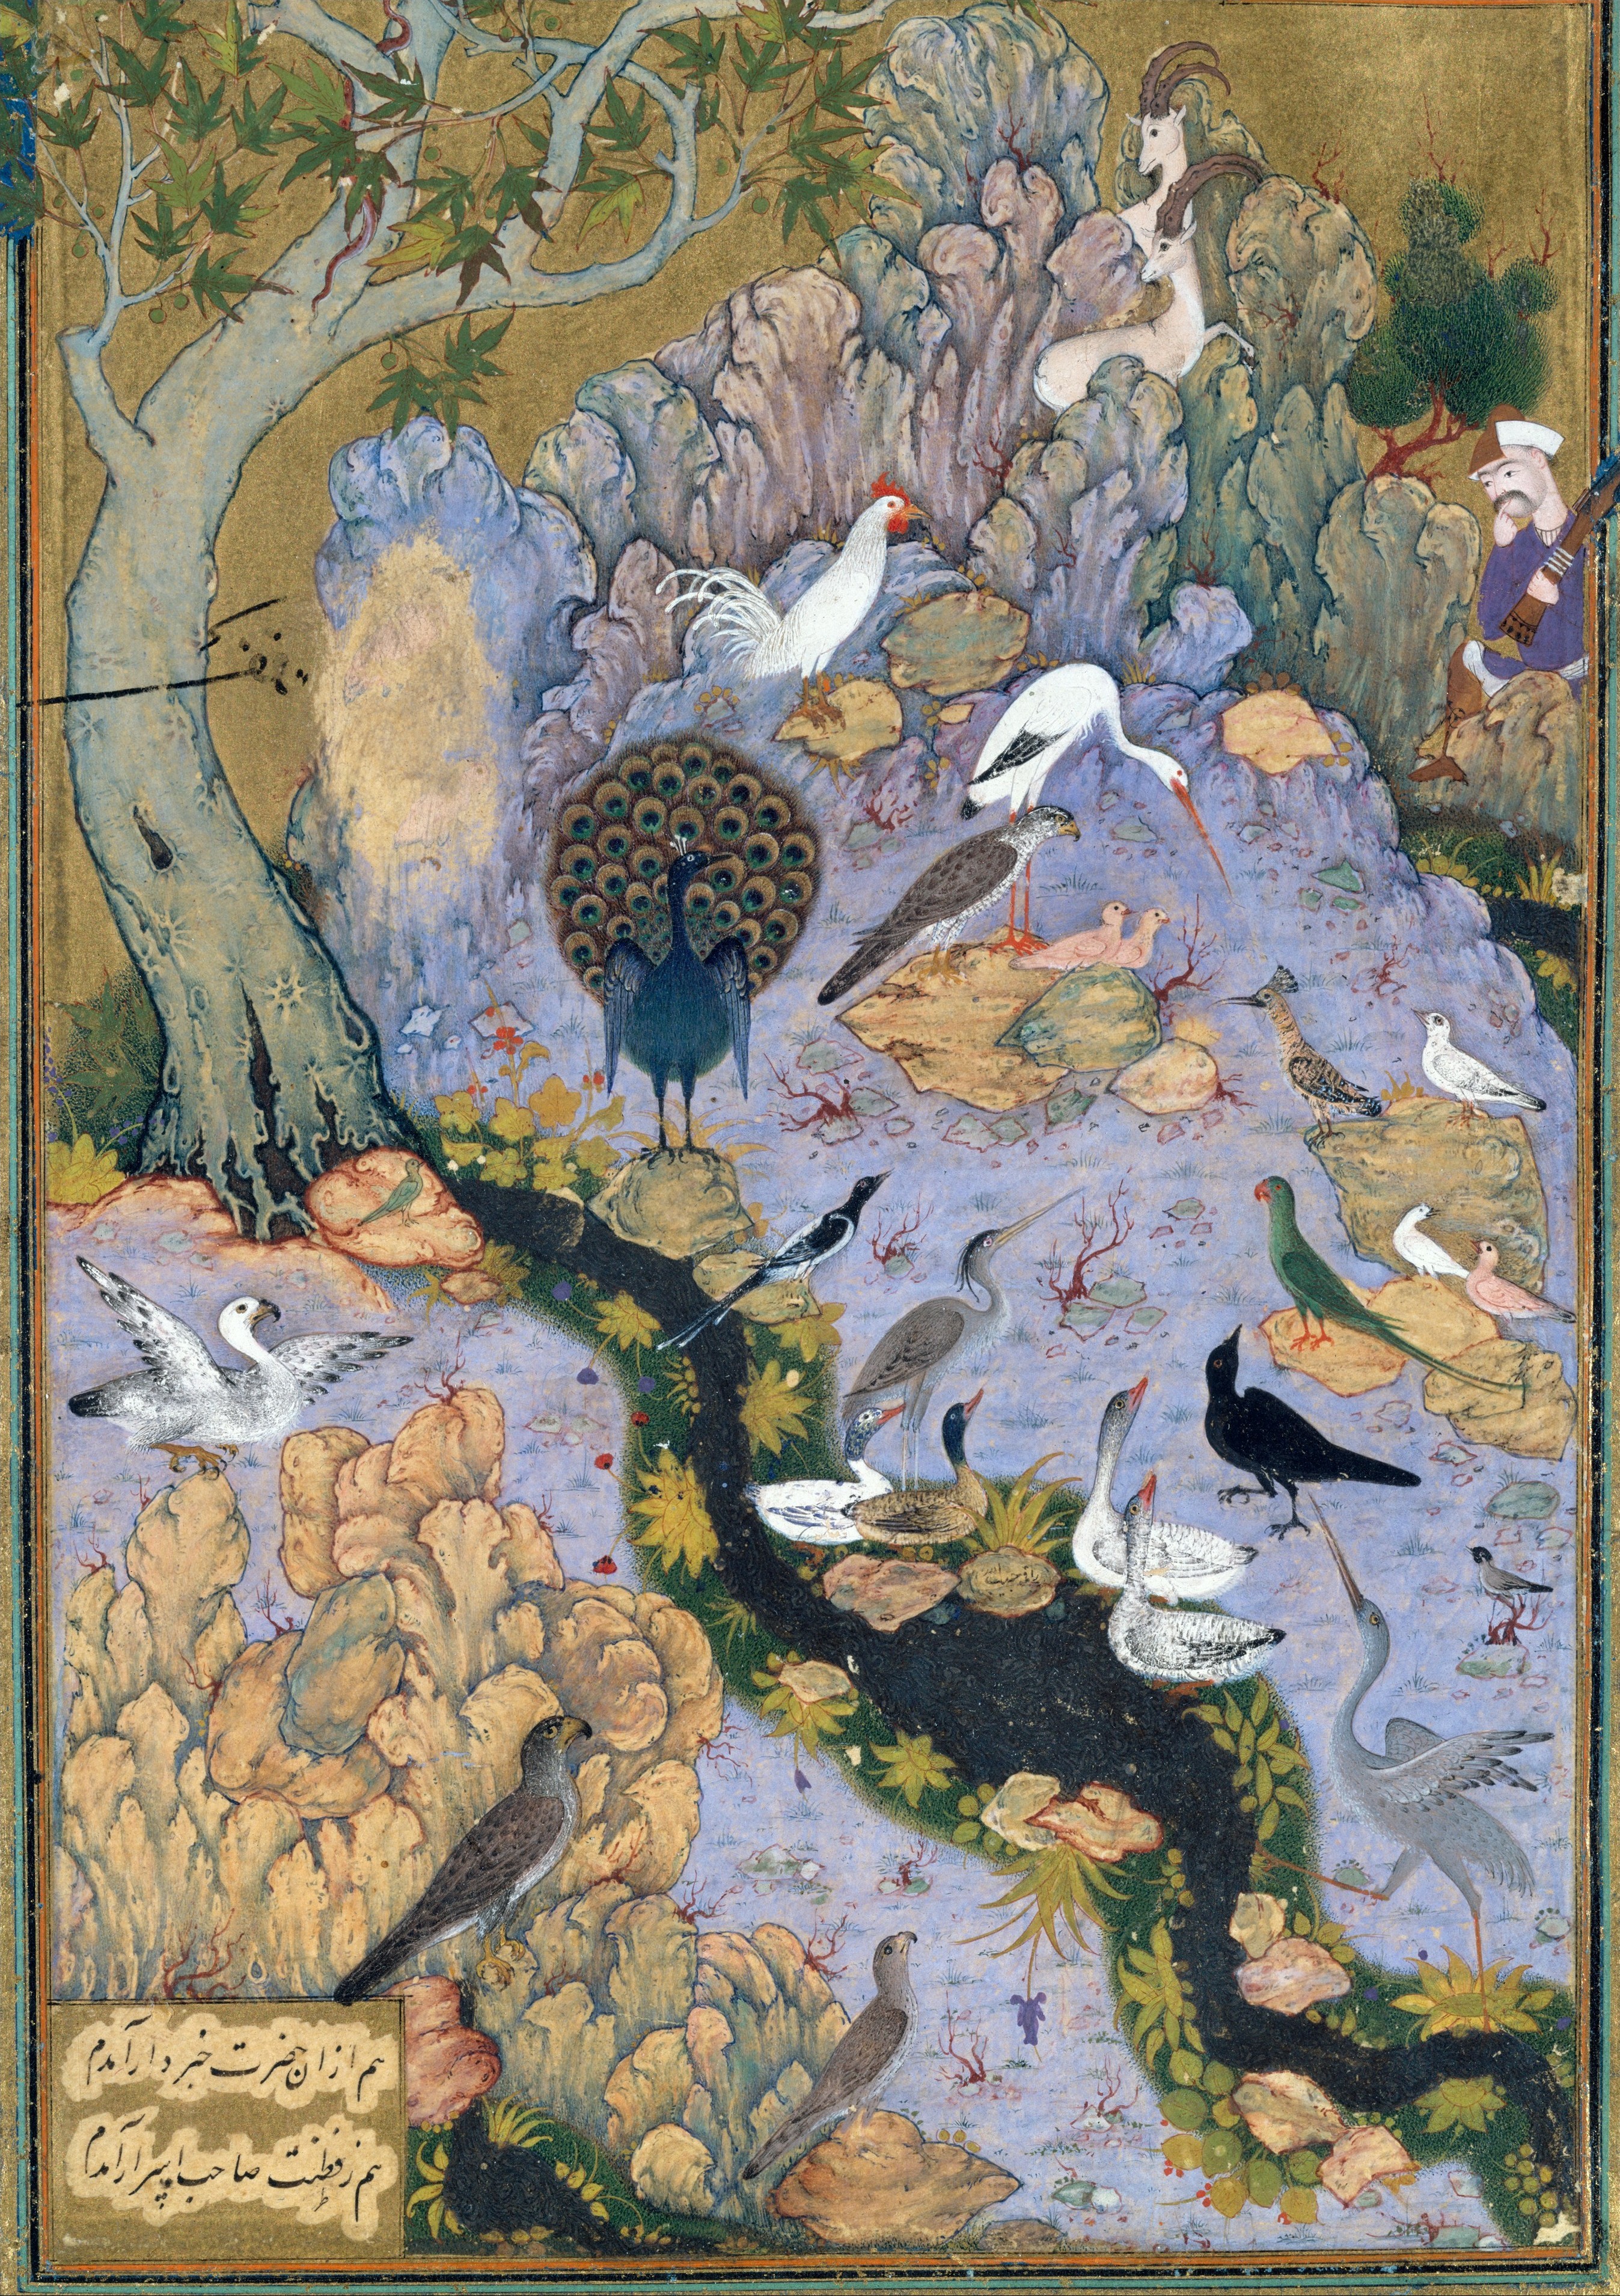 A folio from an illustrated manuscript of The Conference of the Birds, Habiballah of Sava, c. 1600